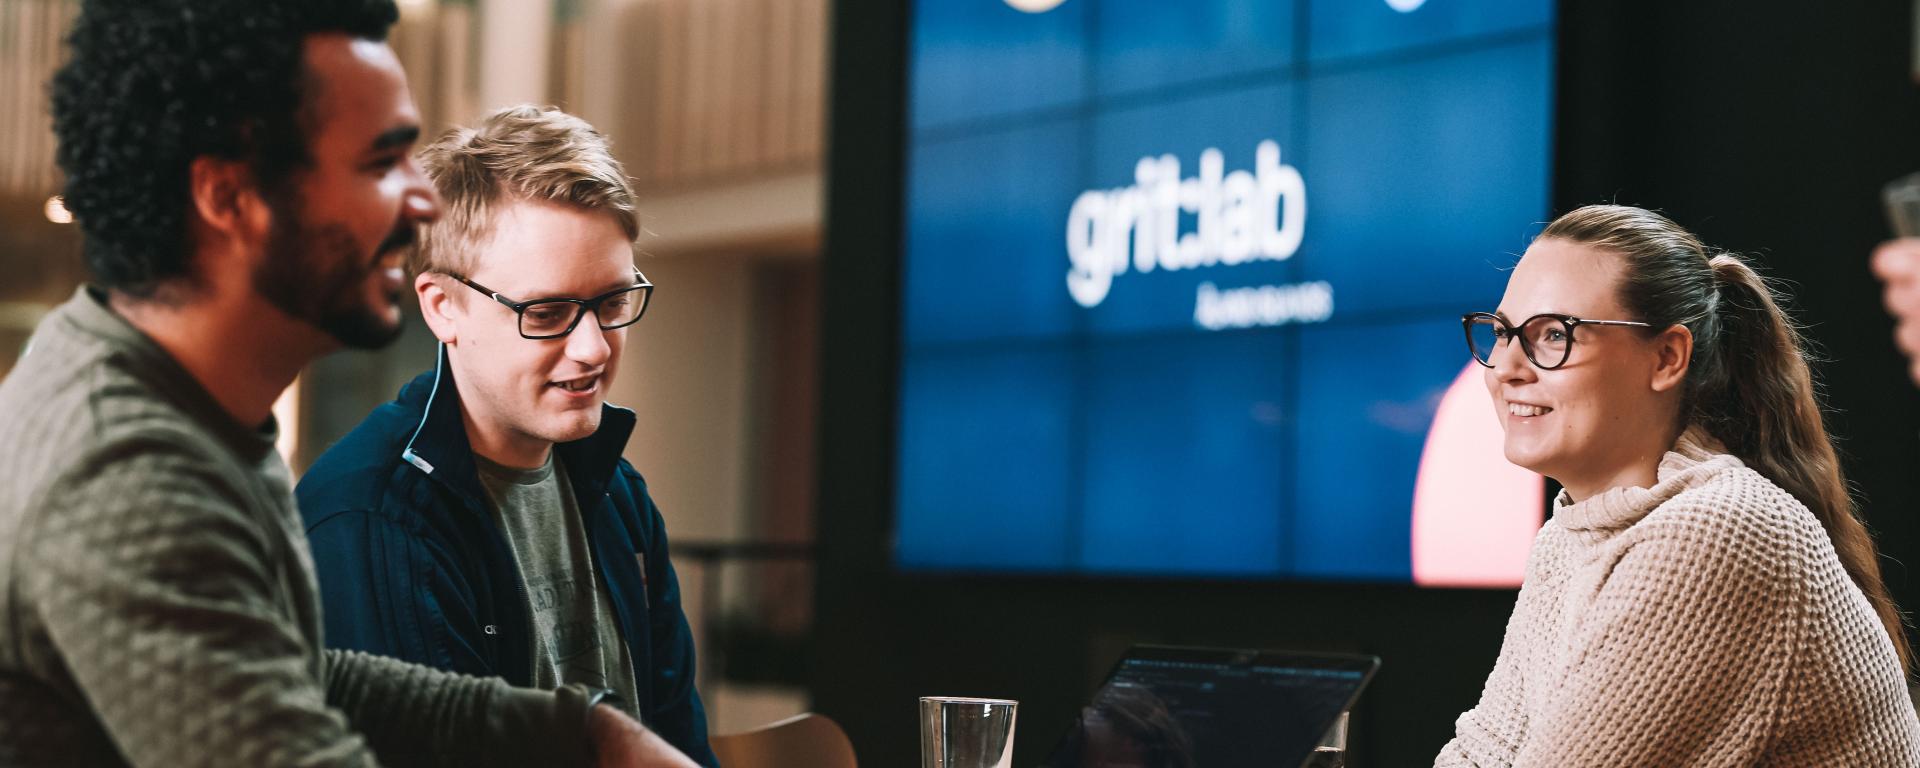 grit:lab is the new coding school in Åland.